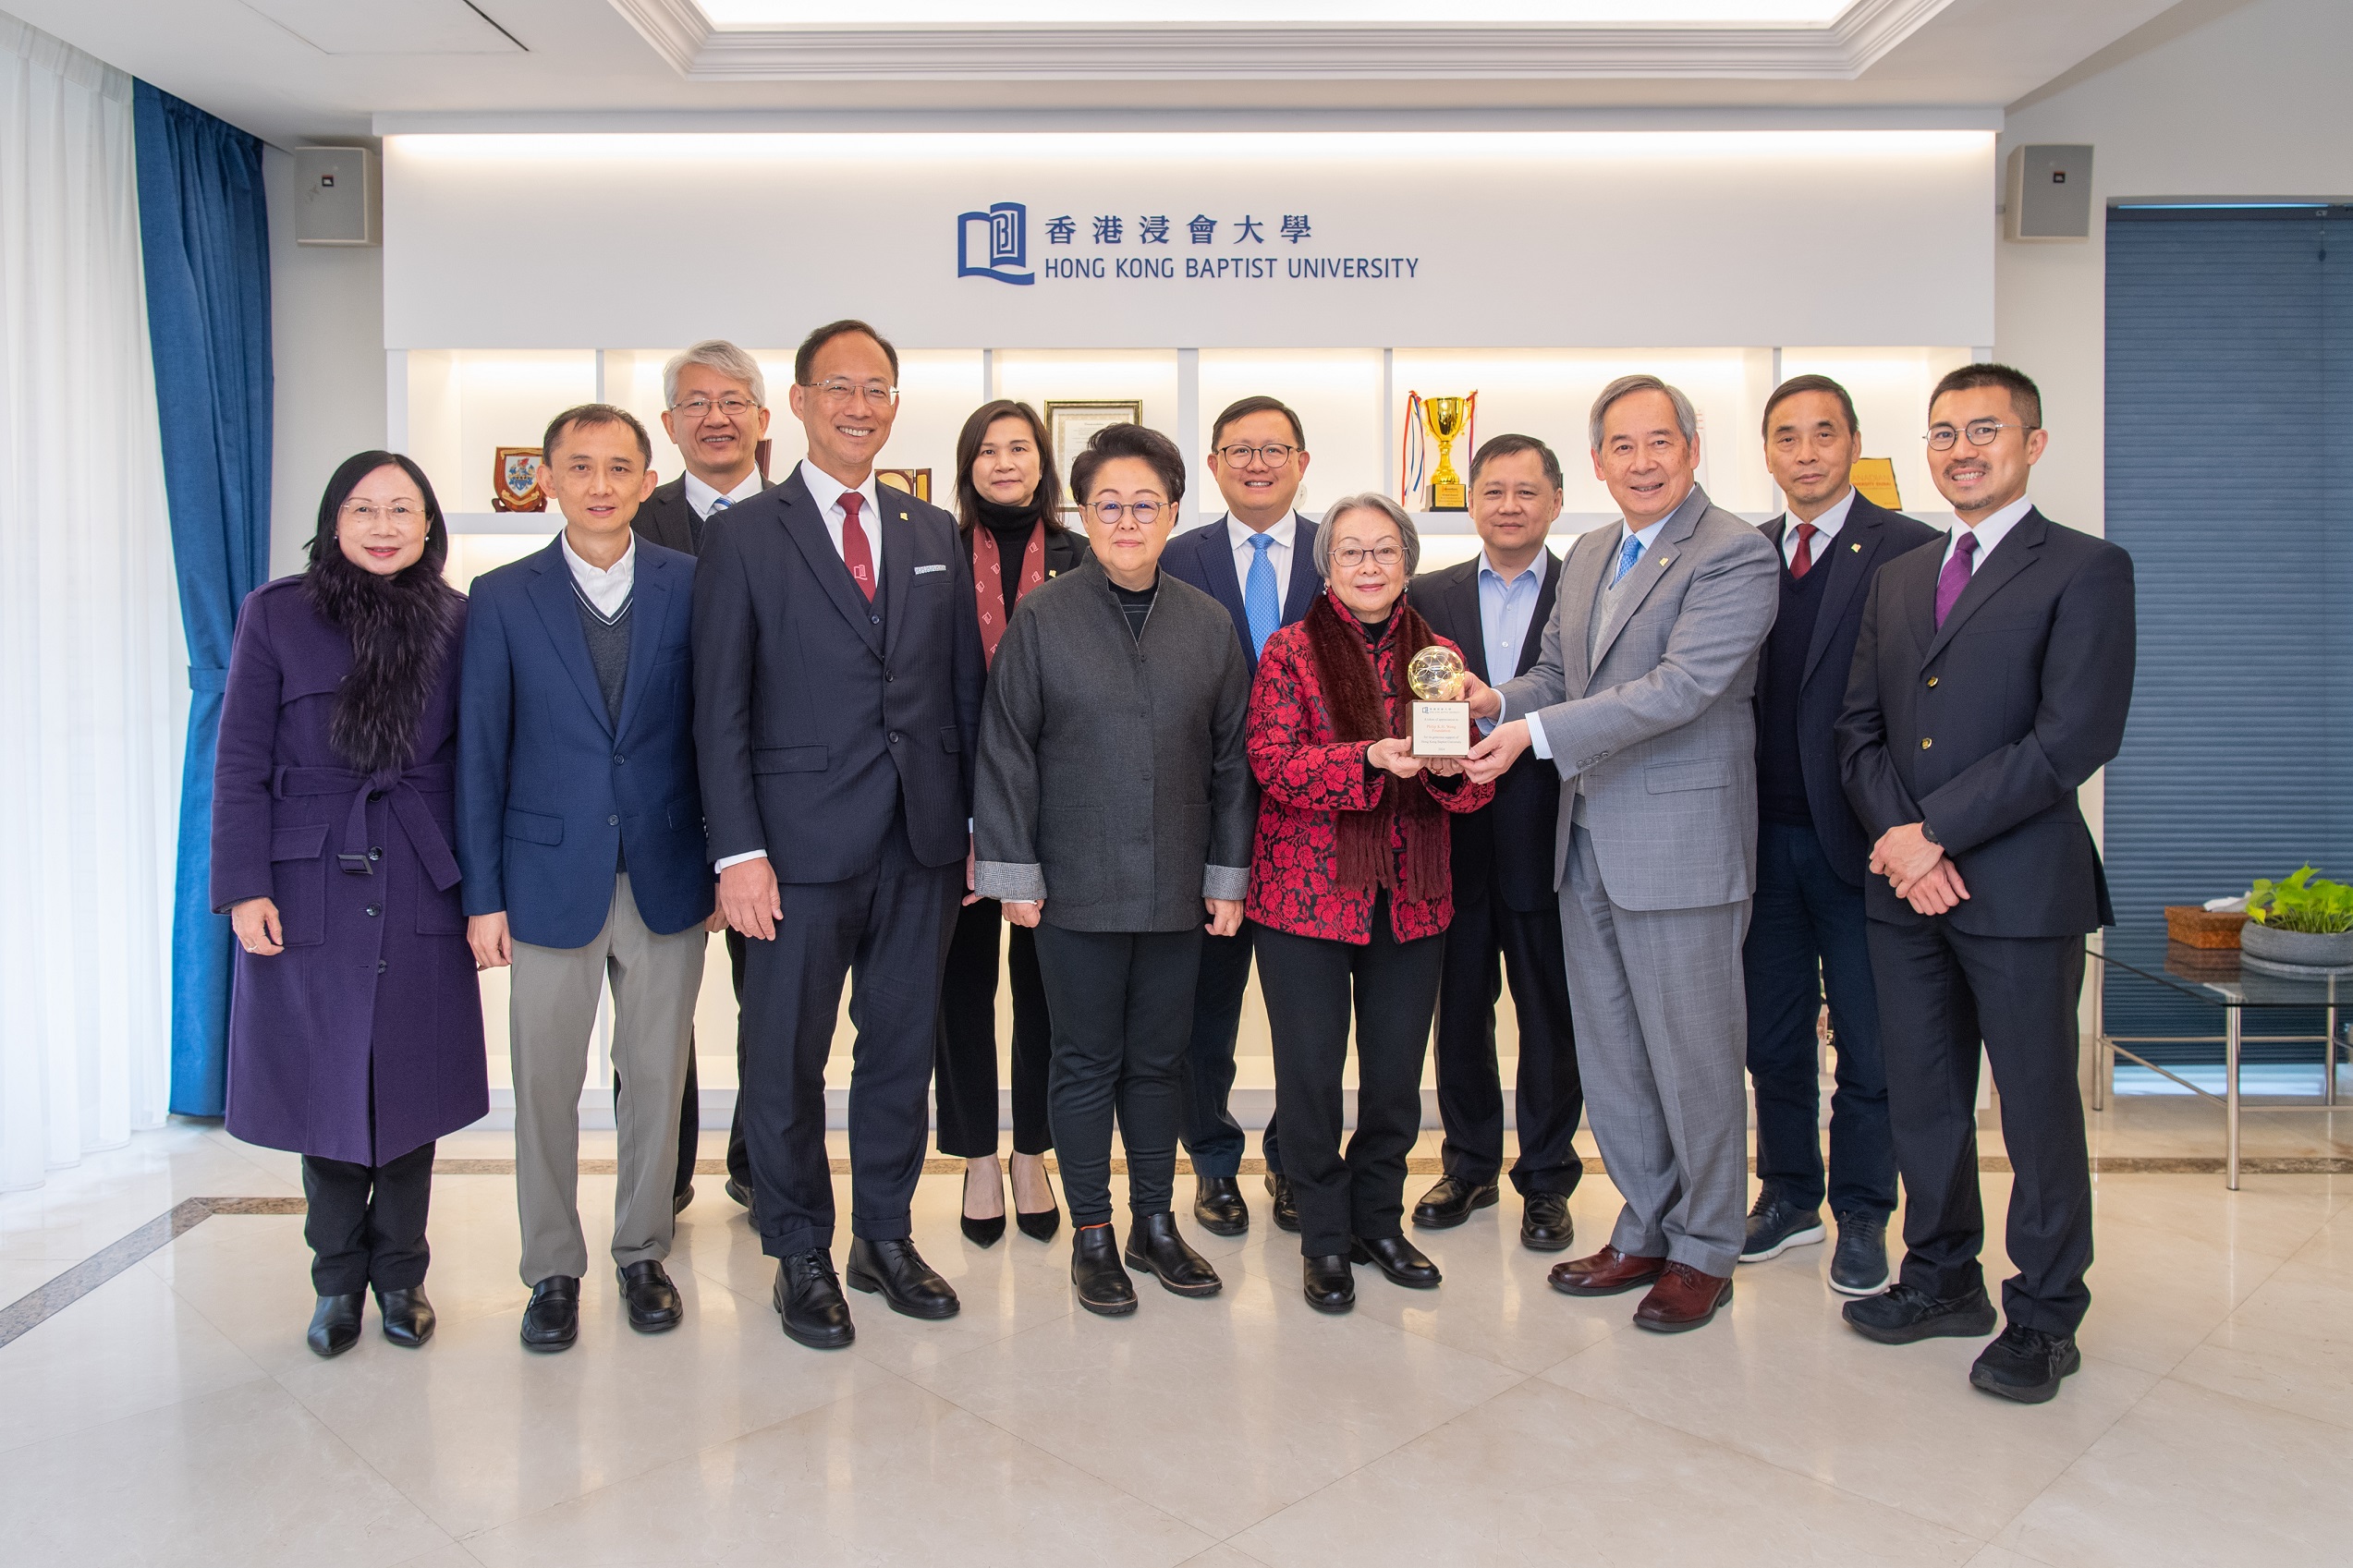 Guests who attend the cheque presentation ceremony include (from right) Dr William Chui, Professor Lyu Aiping, Dr Clement Chen, Mr David Wong, Mrs Gertrude Wong, Dr Kennedy Wong, Ms Ada Wong, Ms Christine Chow, Professor Alexander Wai, Professor Bian Zhaoxiang, Mr John Wong and Mrs Lily Chan.